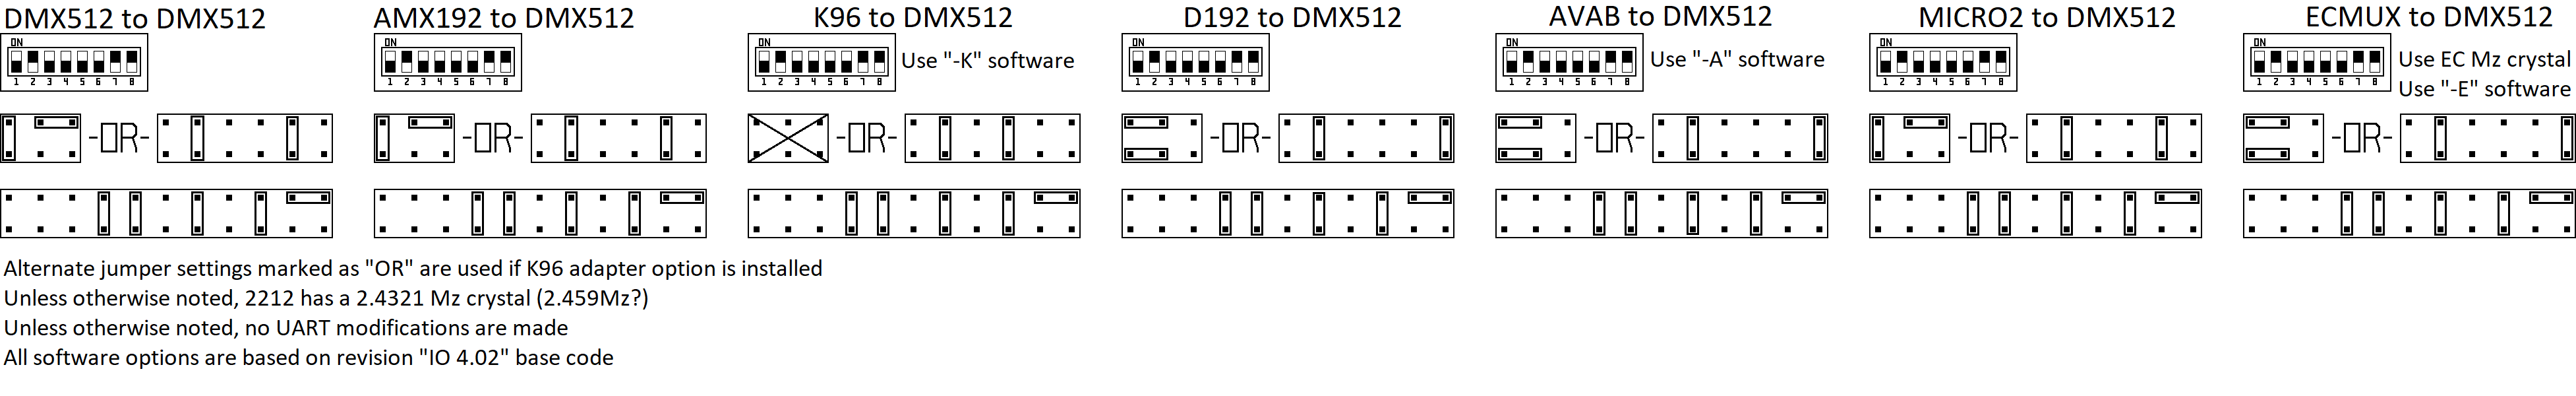 RD2031 Input to DMX512.png